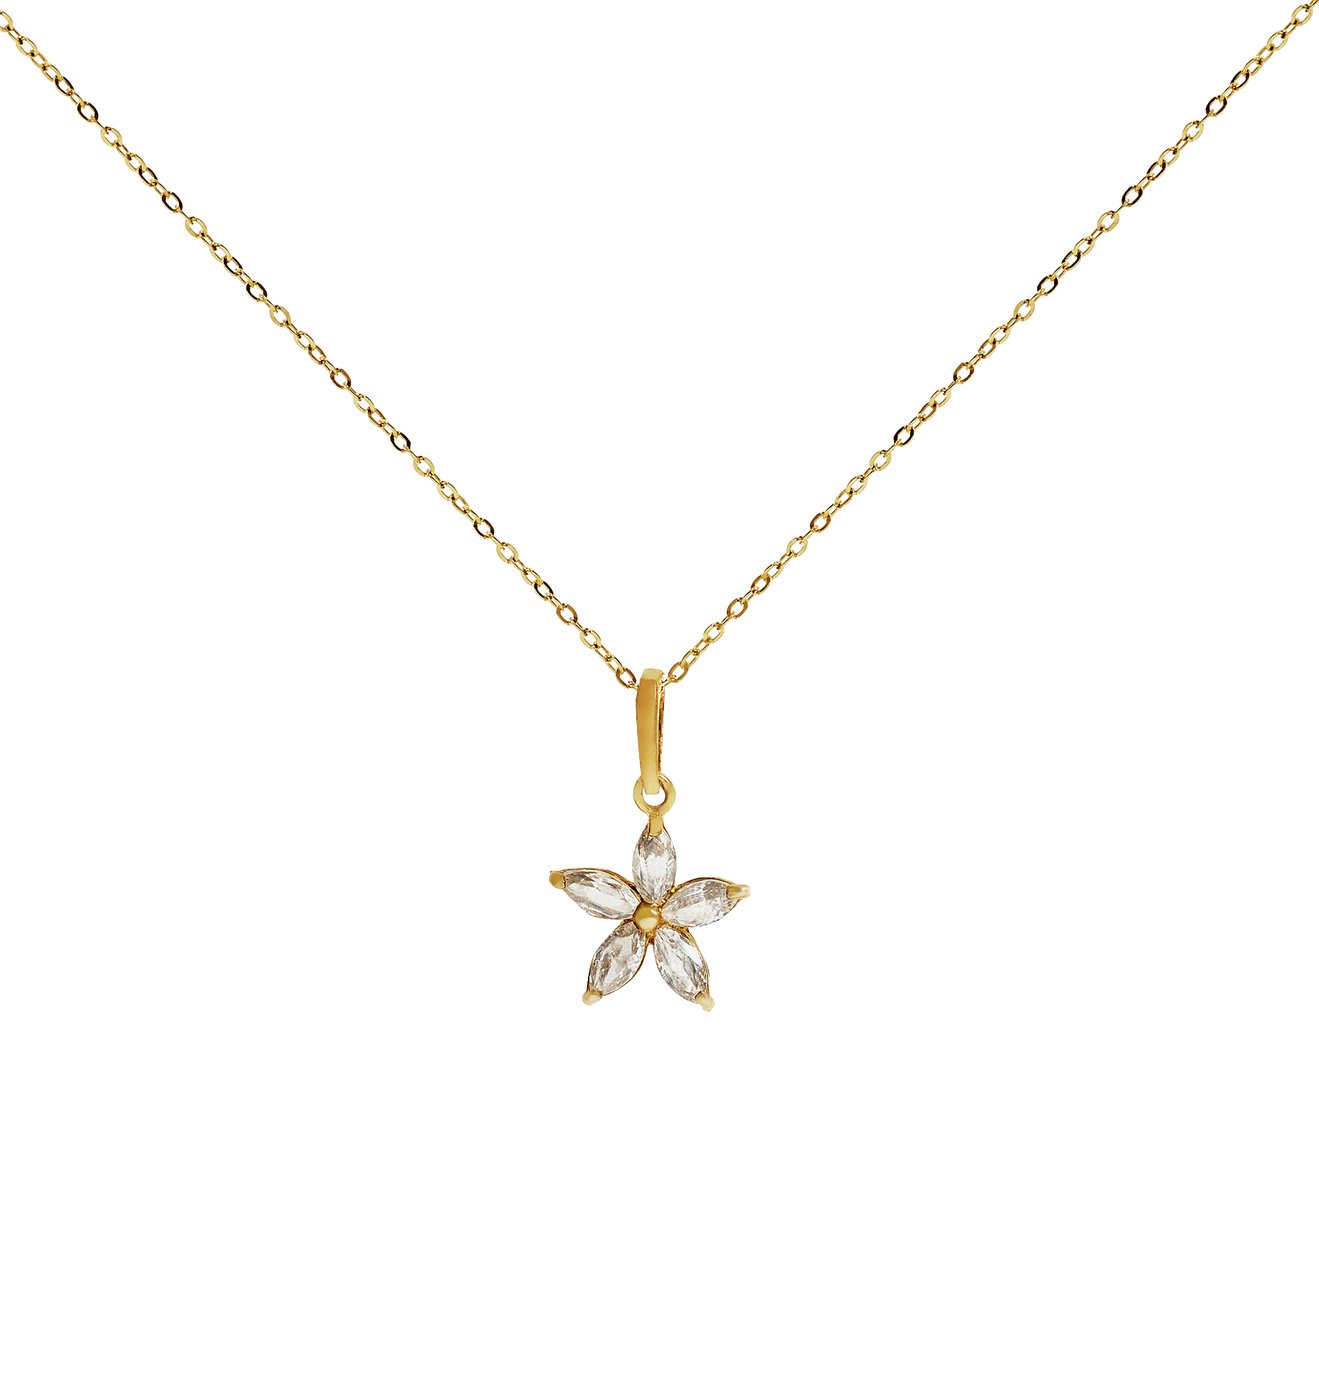 Revere 9ct Gold Flower Pendant 18 Inch Necklace